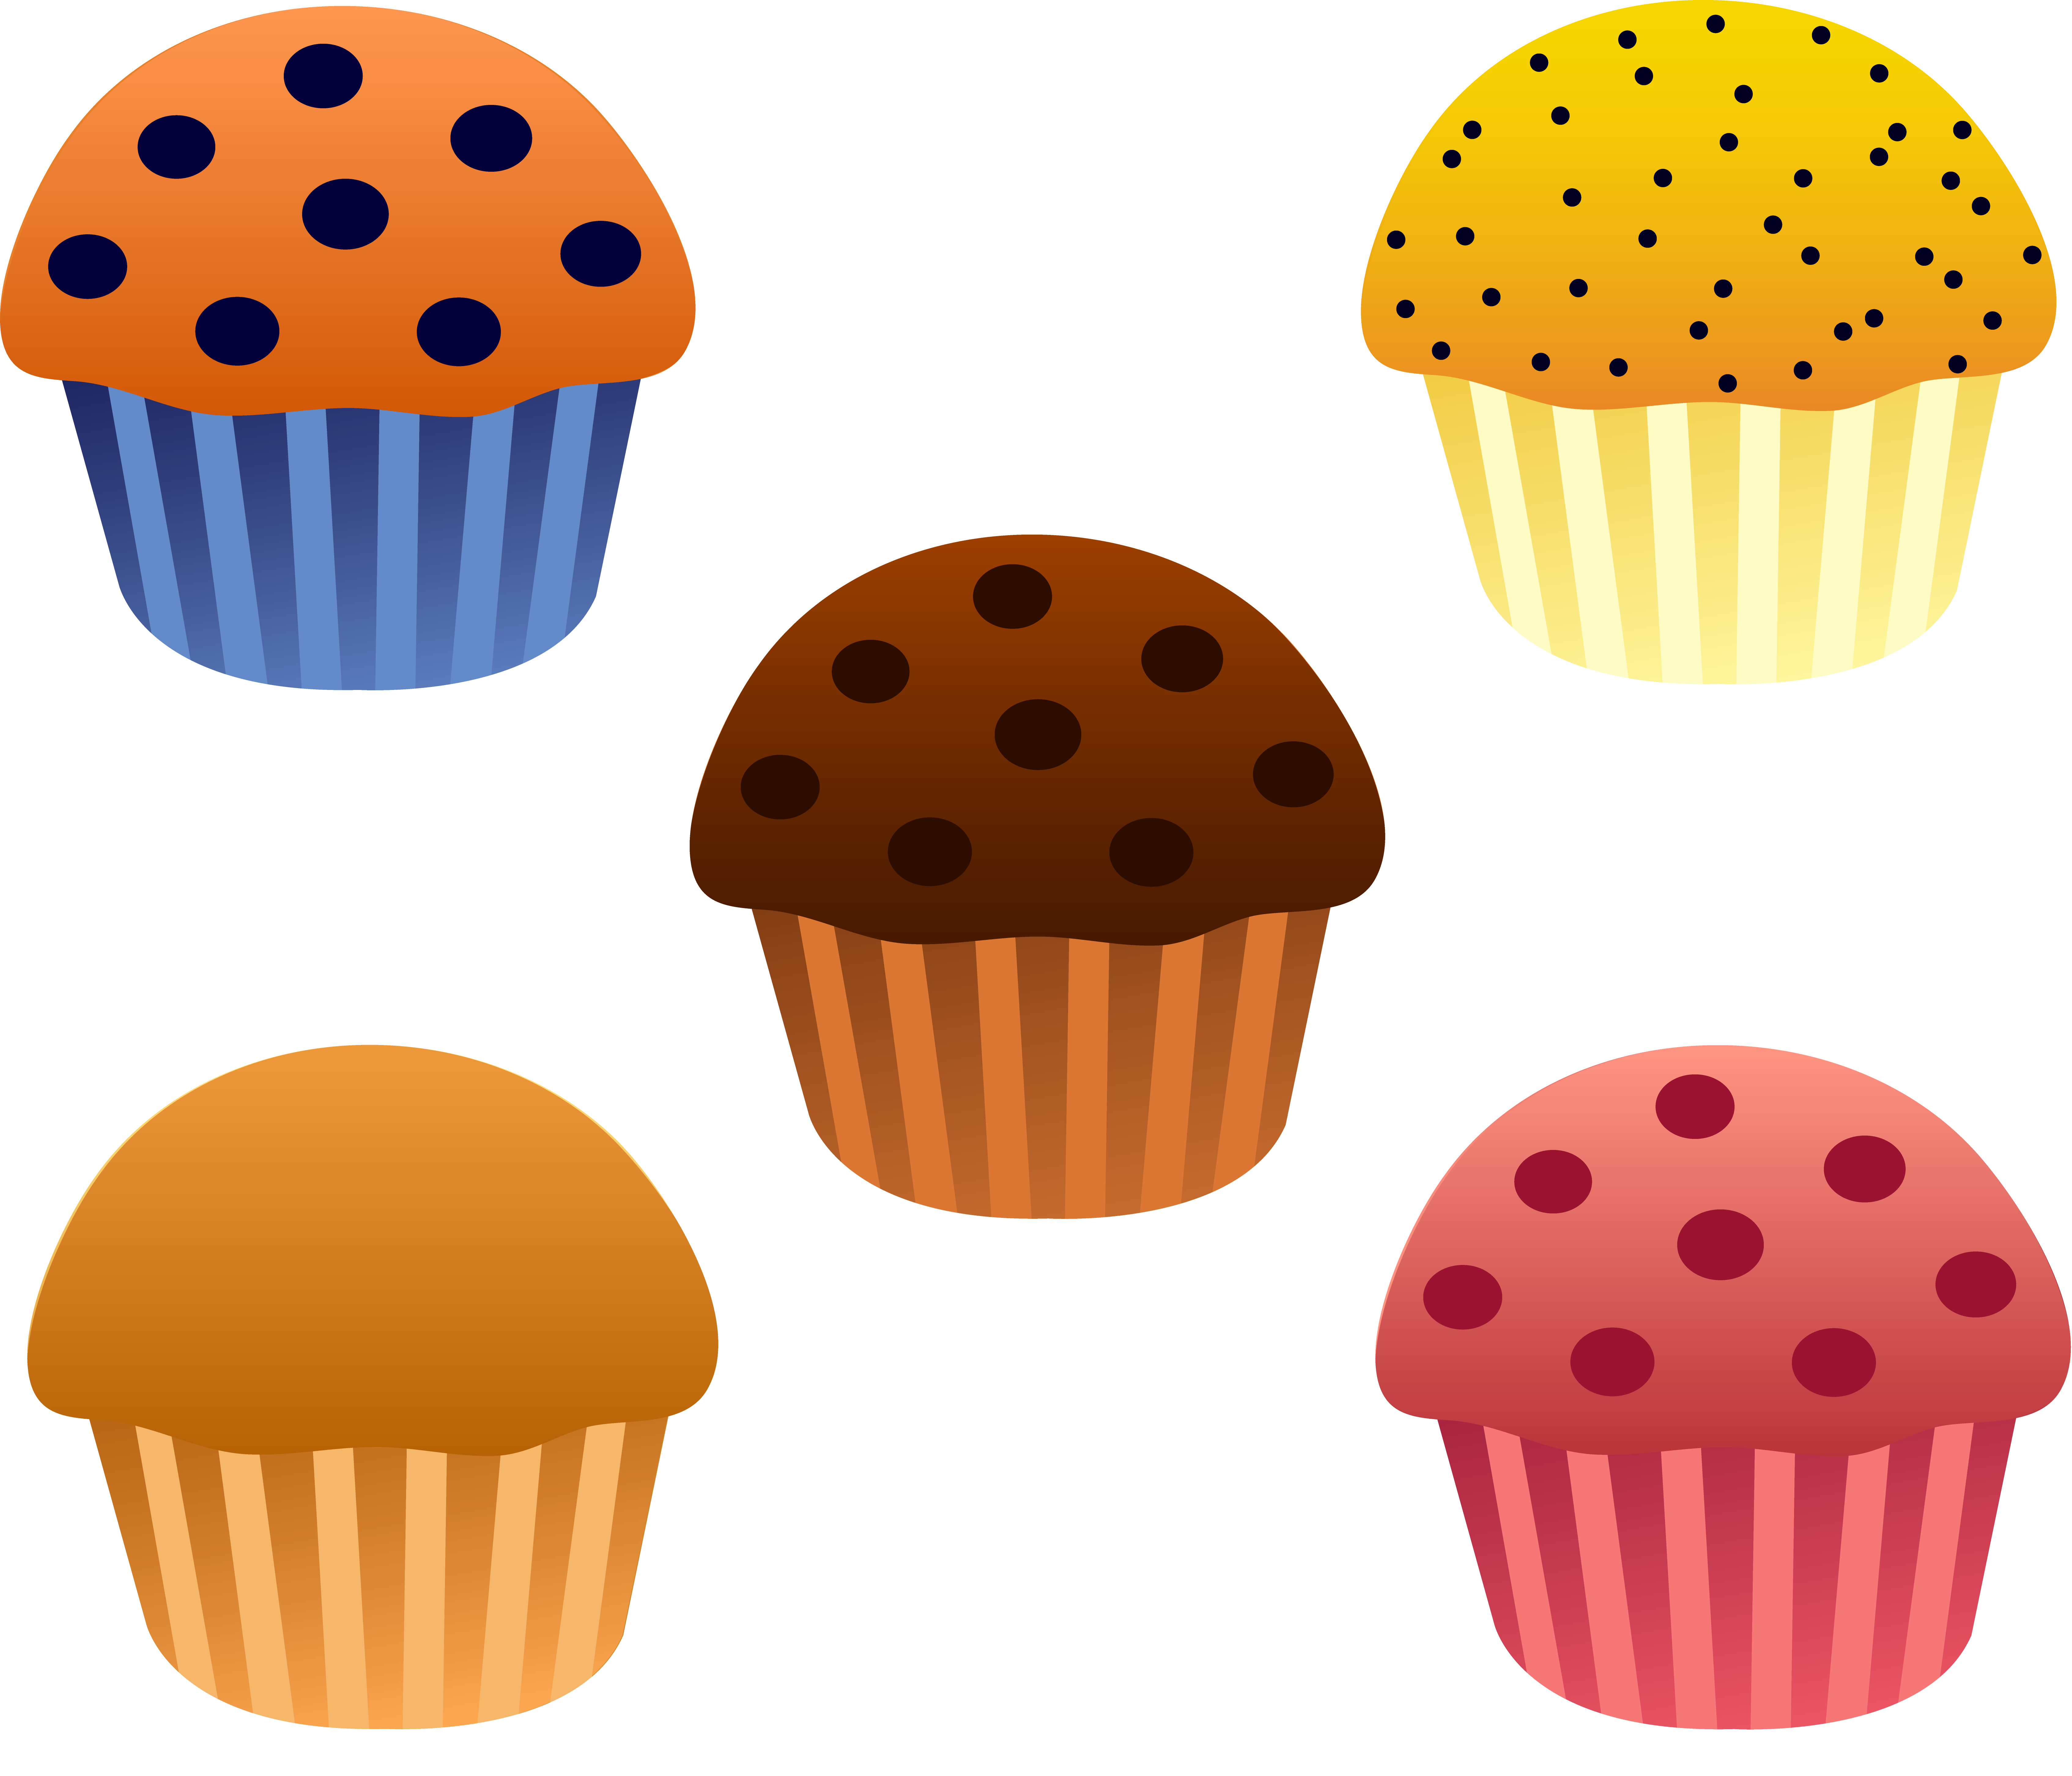 Set of Five Assorted Muffins.